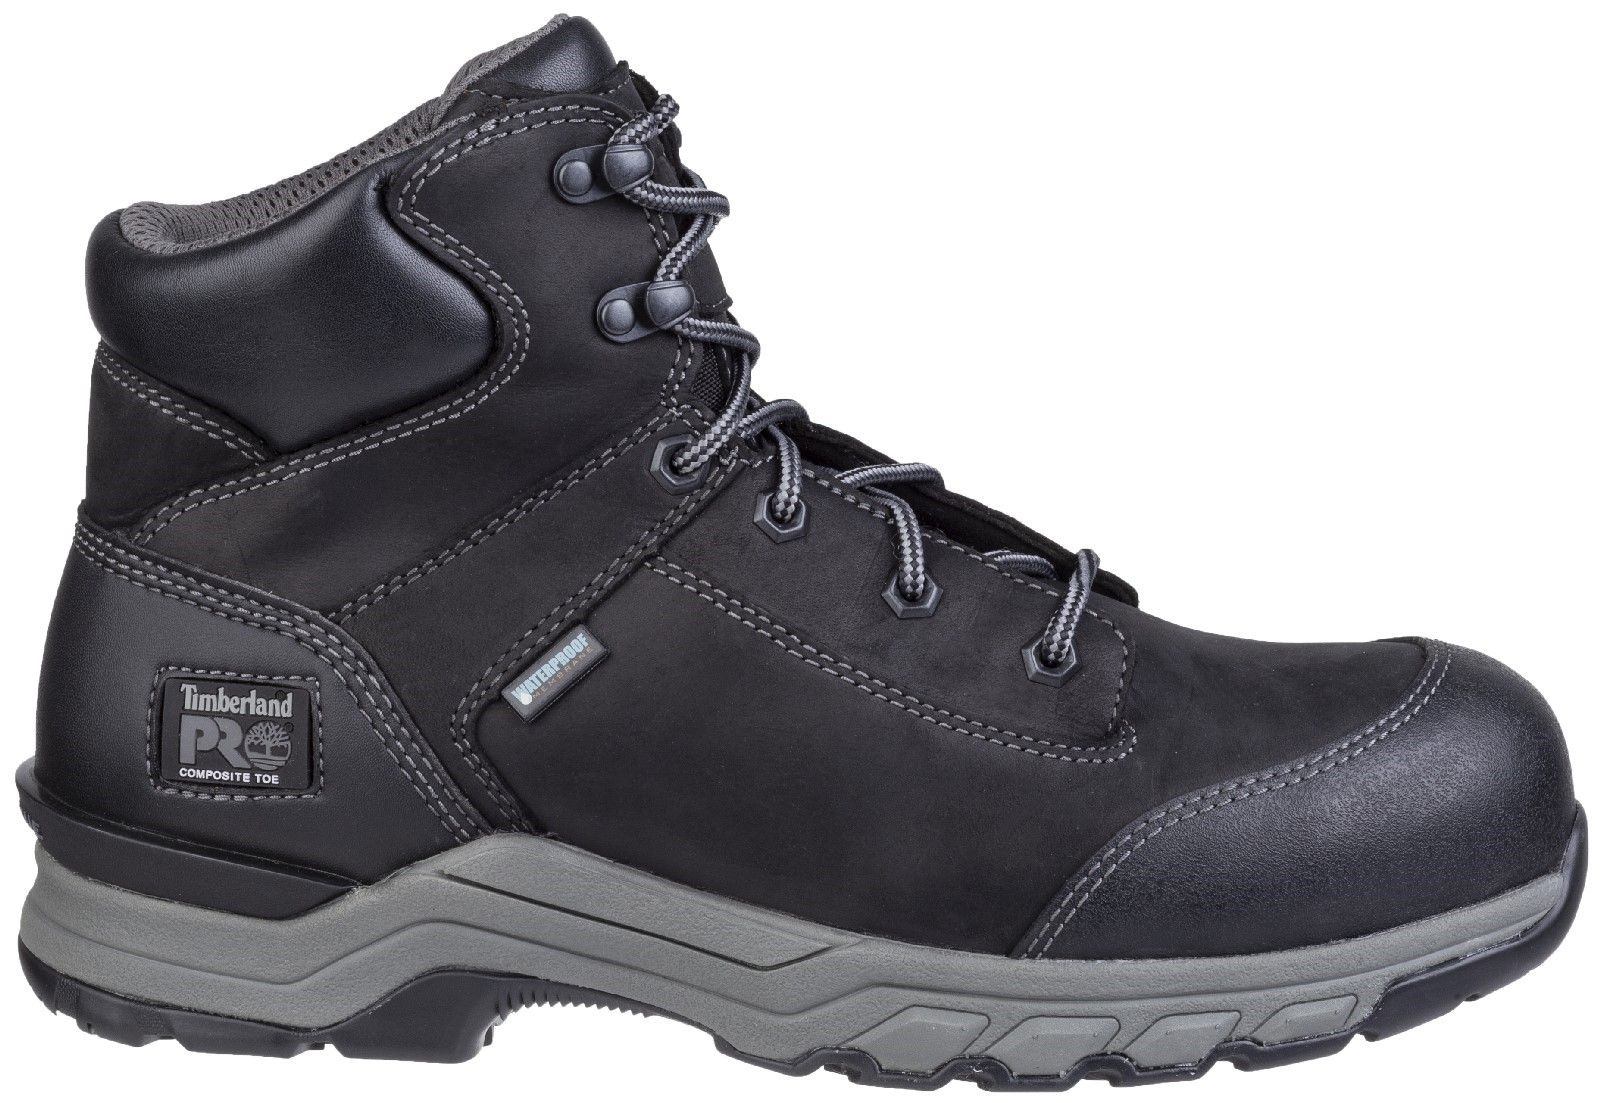 Hypercharge lace up waterproof boot with impact and compression resistant toe cap, puncture resistant plate with anti-fatigue footbed for comfort and independent suspension multi-density rubber outsole for added layer of comfort and stability.ISN technology for added layer of comfort & stability. 
Waterproof. 
Slip Resistant SRC Rubber Outsole. 
Heat Resistant HRO. 
Dynamic Anti-fatigue footbed.